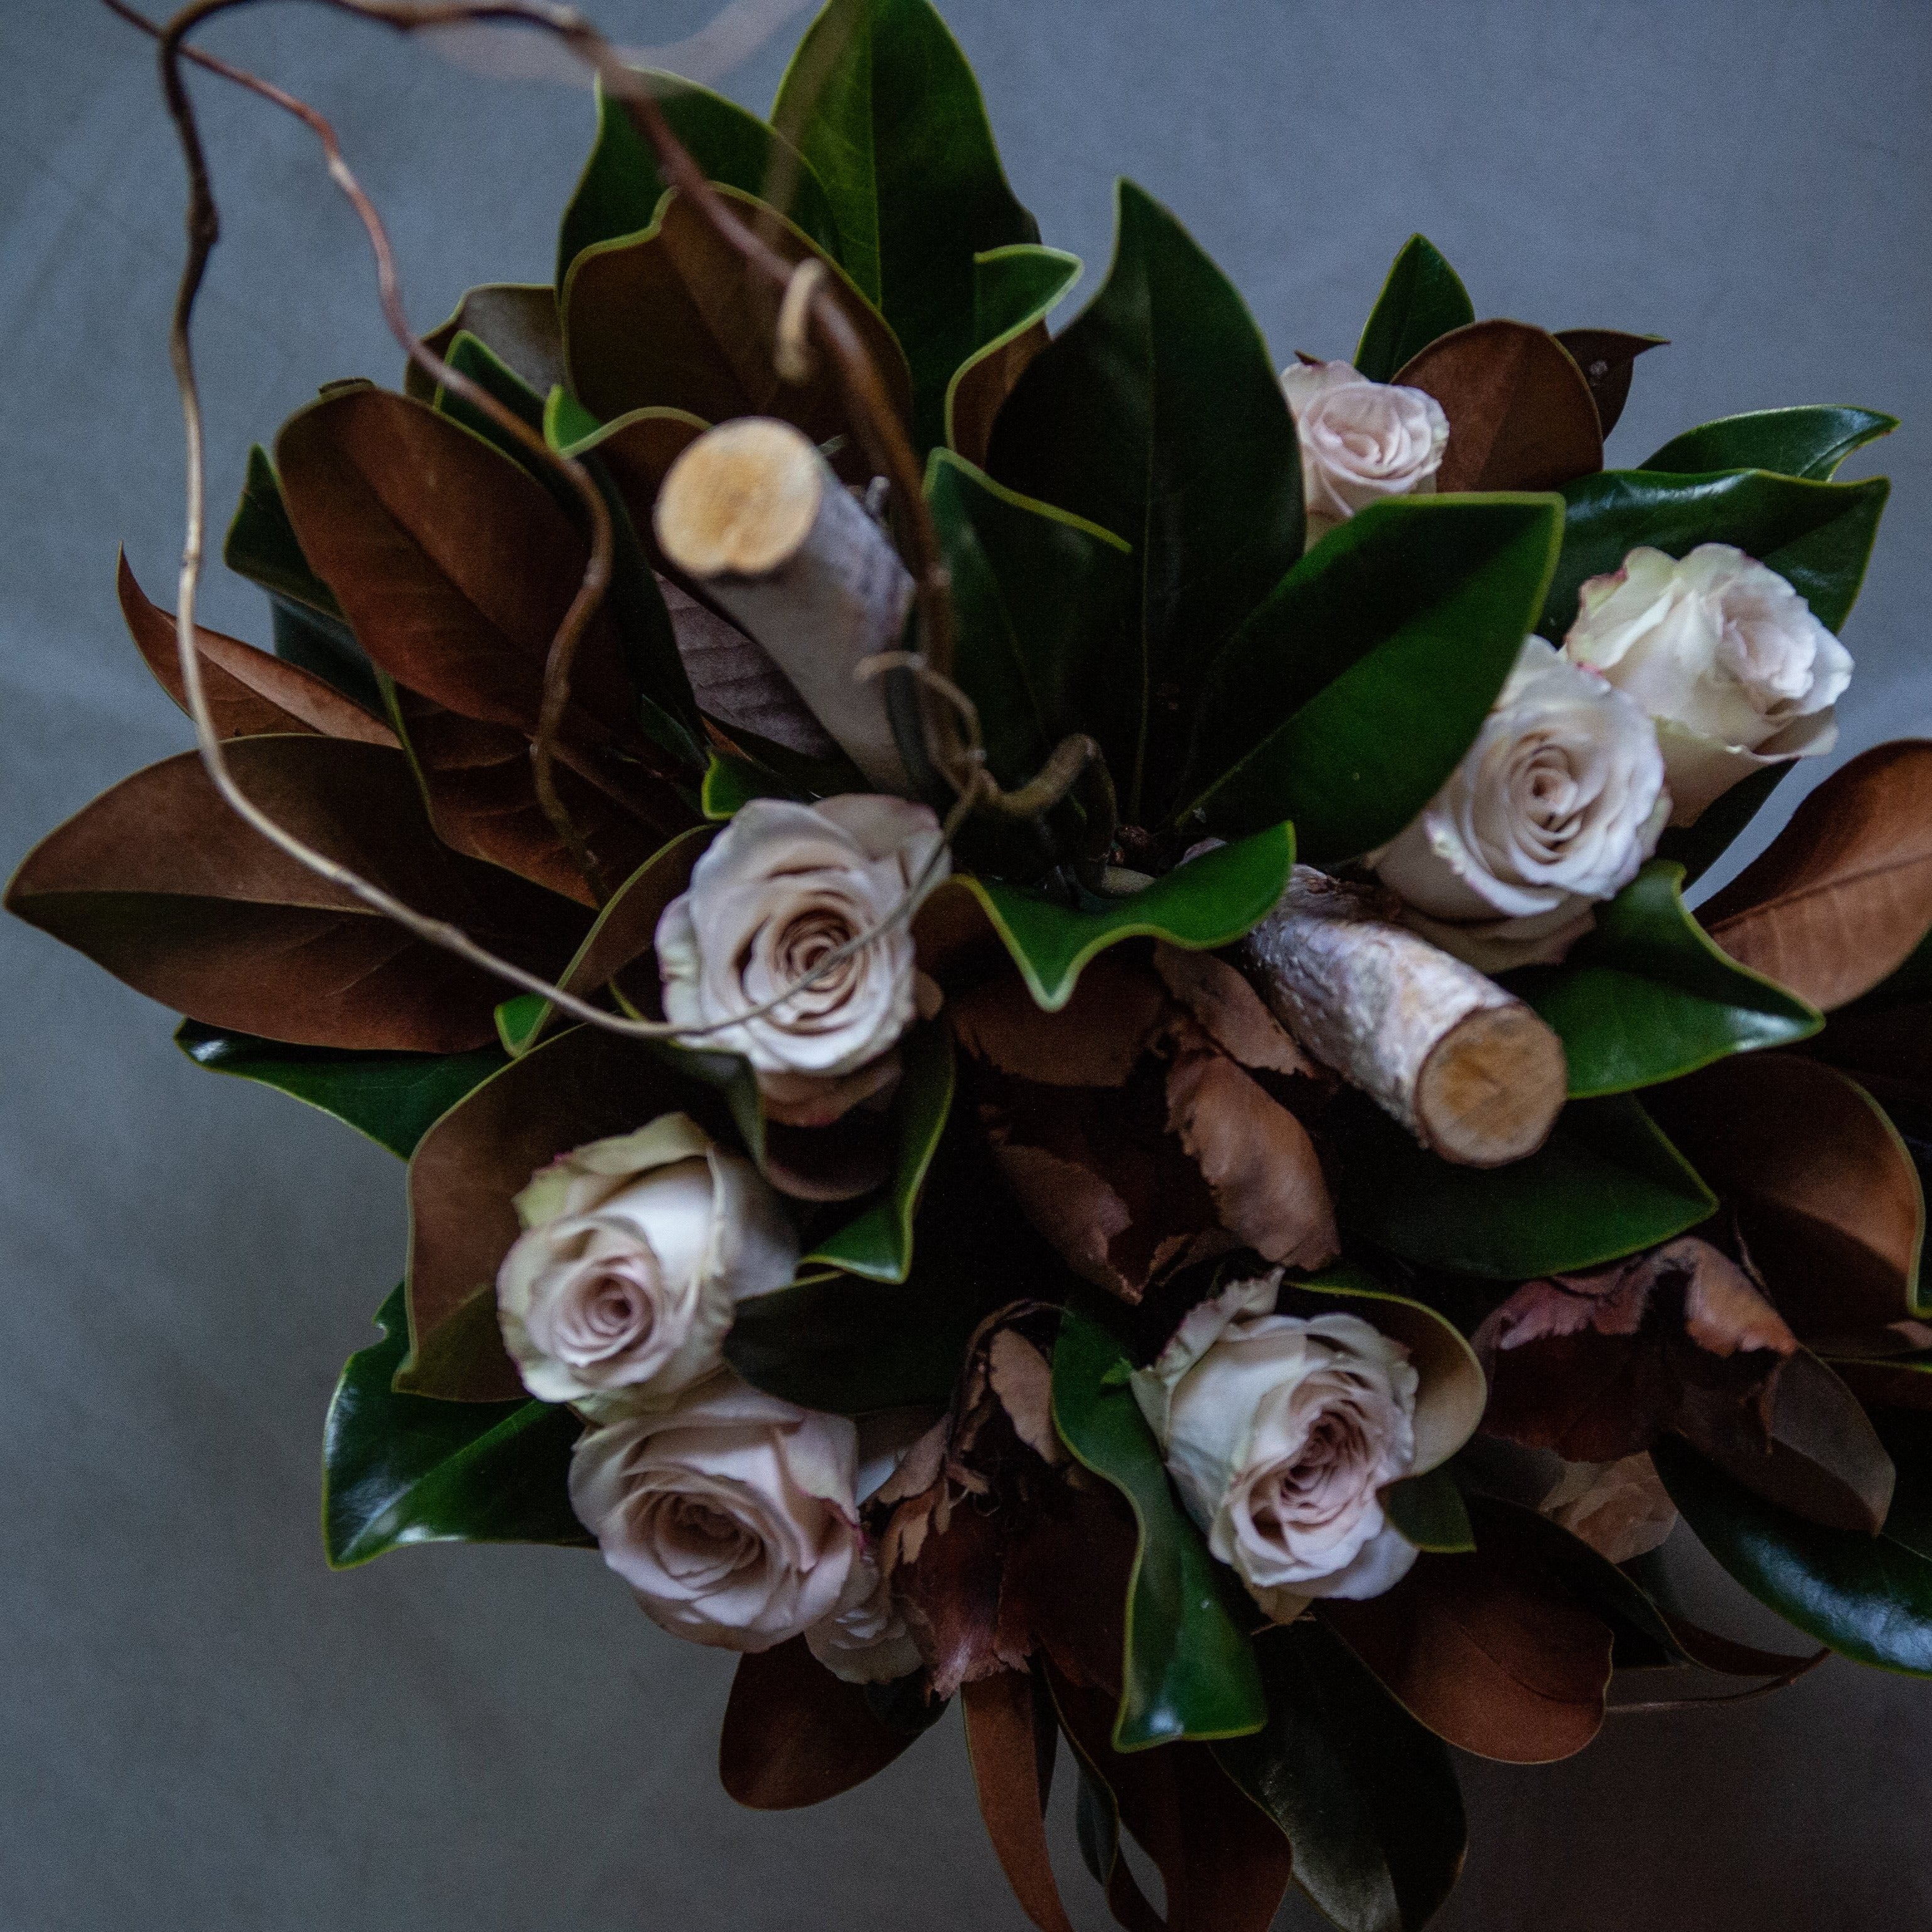 Luxury floral design of taupe roses with curly willow, magnolia, birch branches, preserved florals created by a local florist